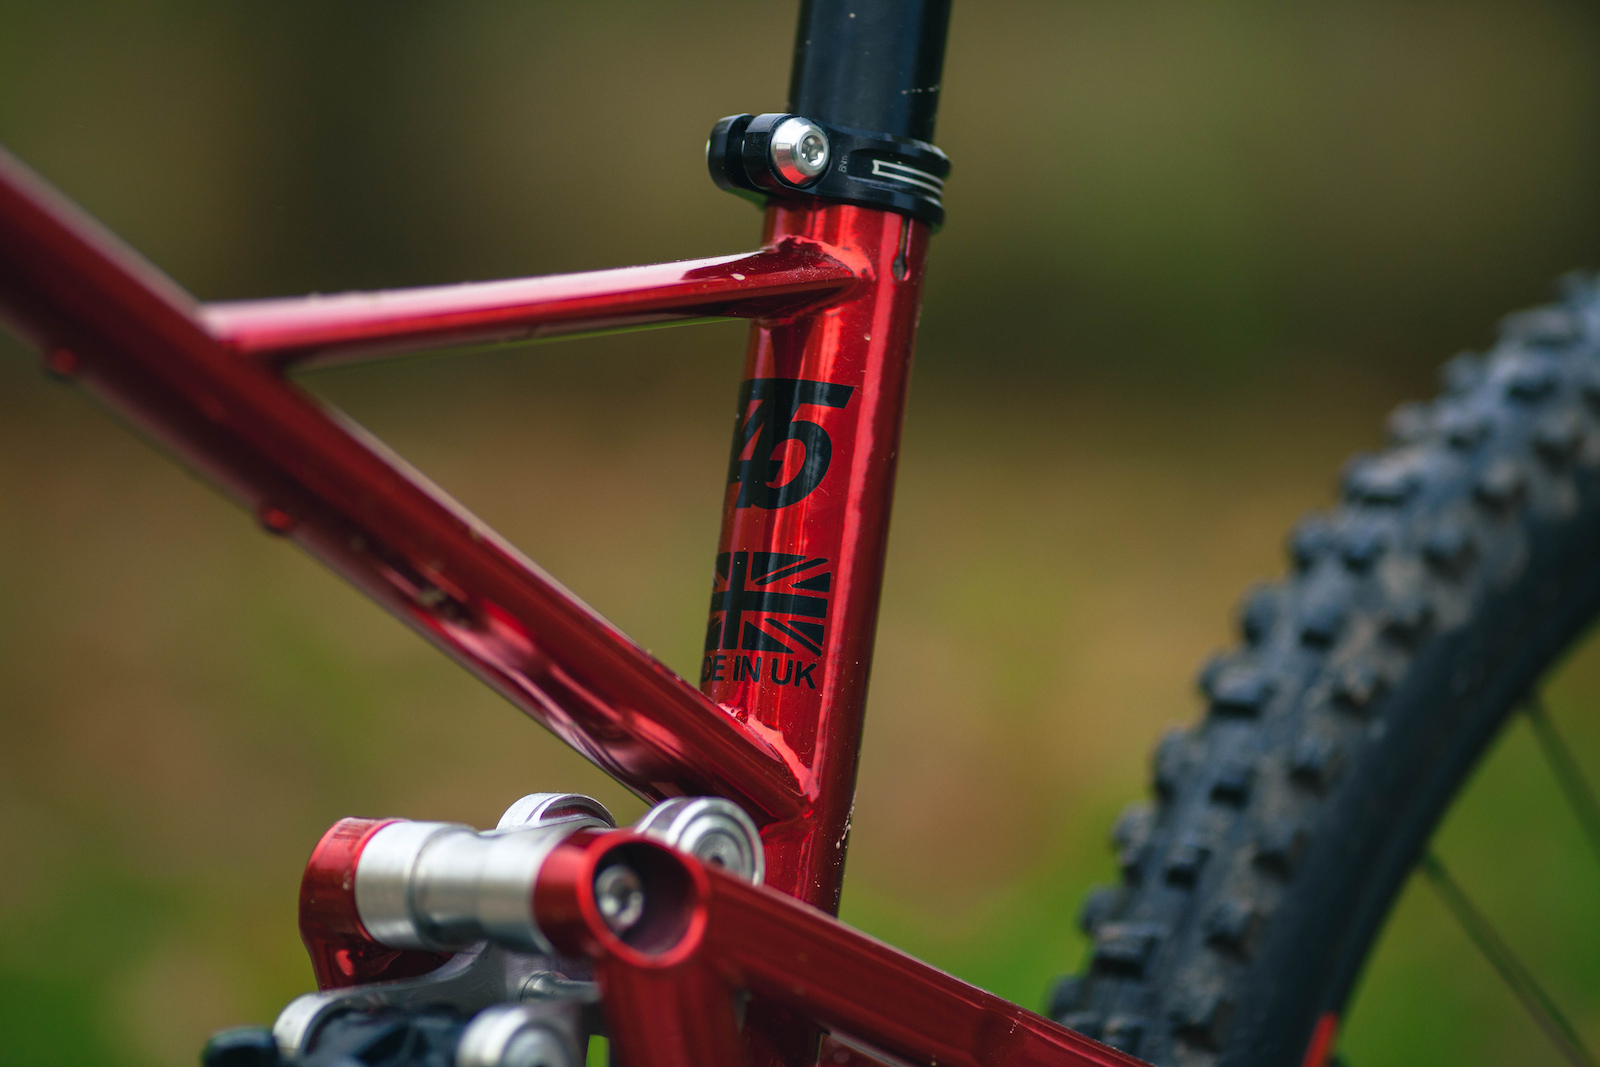 Rå-Bikes
Introducing the .12
the latest addition to the Rå stable. A 165mm rear 180mm front 29er built to take the hits and call the shots with a 3.13 - 1.99 progressive leverage ratio.
.
Vital stats-
64° head angle 78.5° seat angle, 30mm BB drop, 435mm chainstays

www.ra-bikes.com